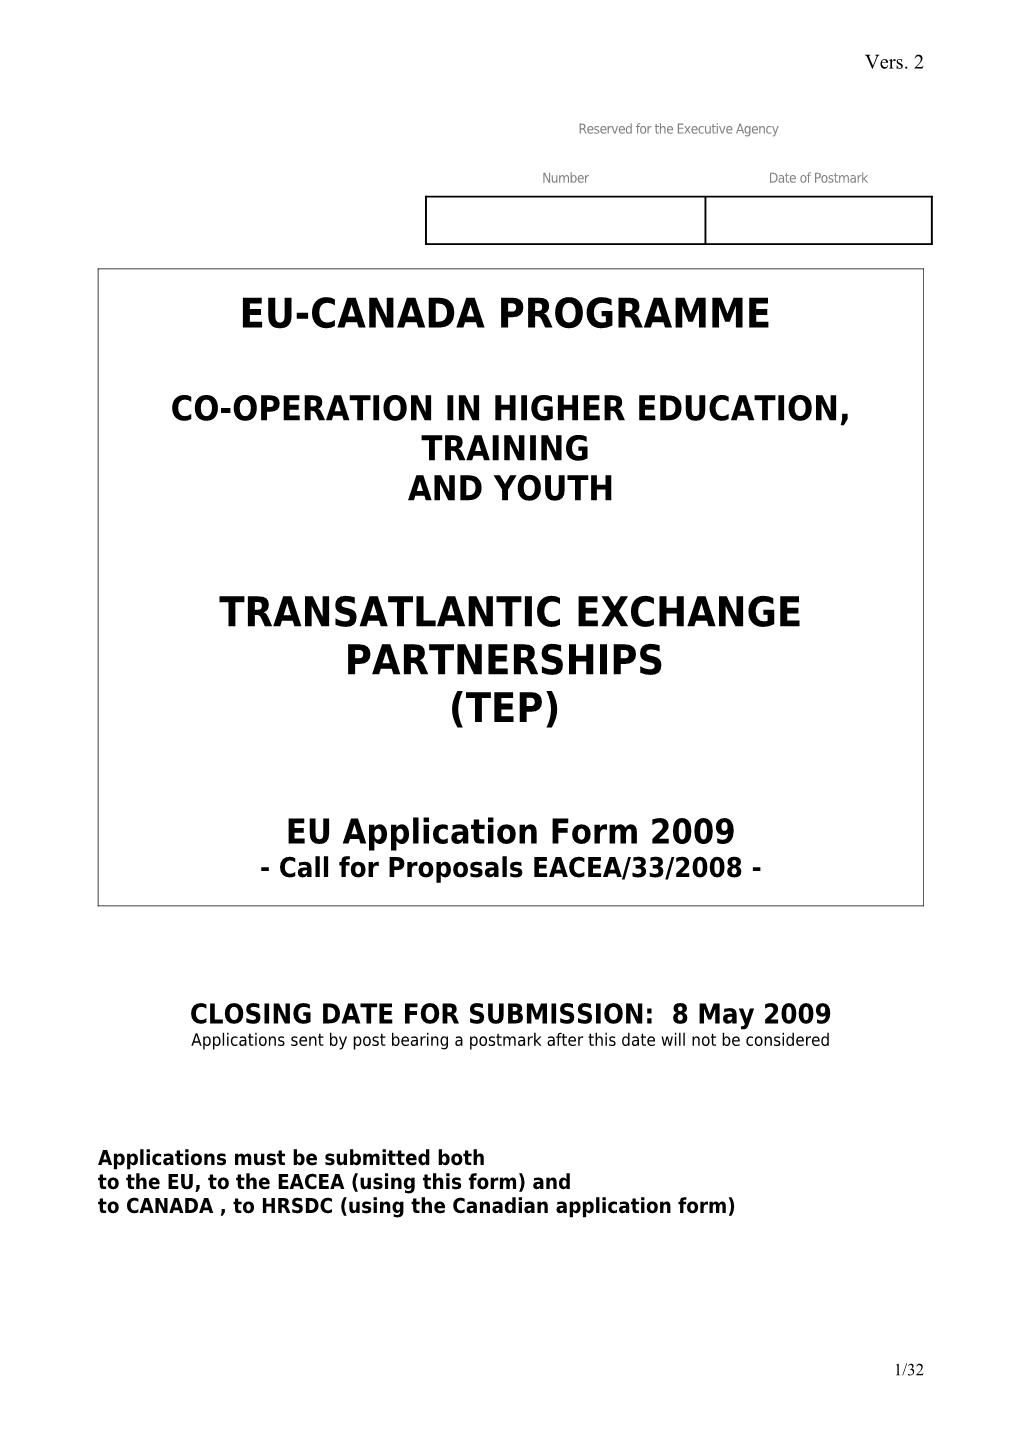 EU-Canada Call for Proposals & Guidelines 2006